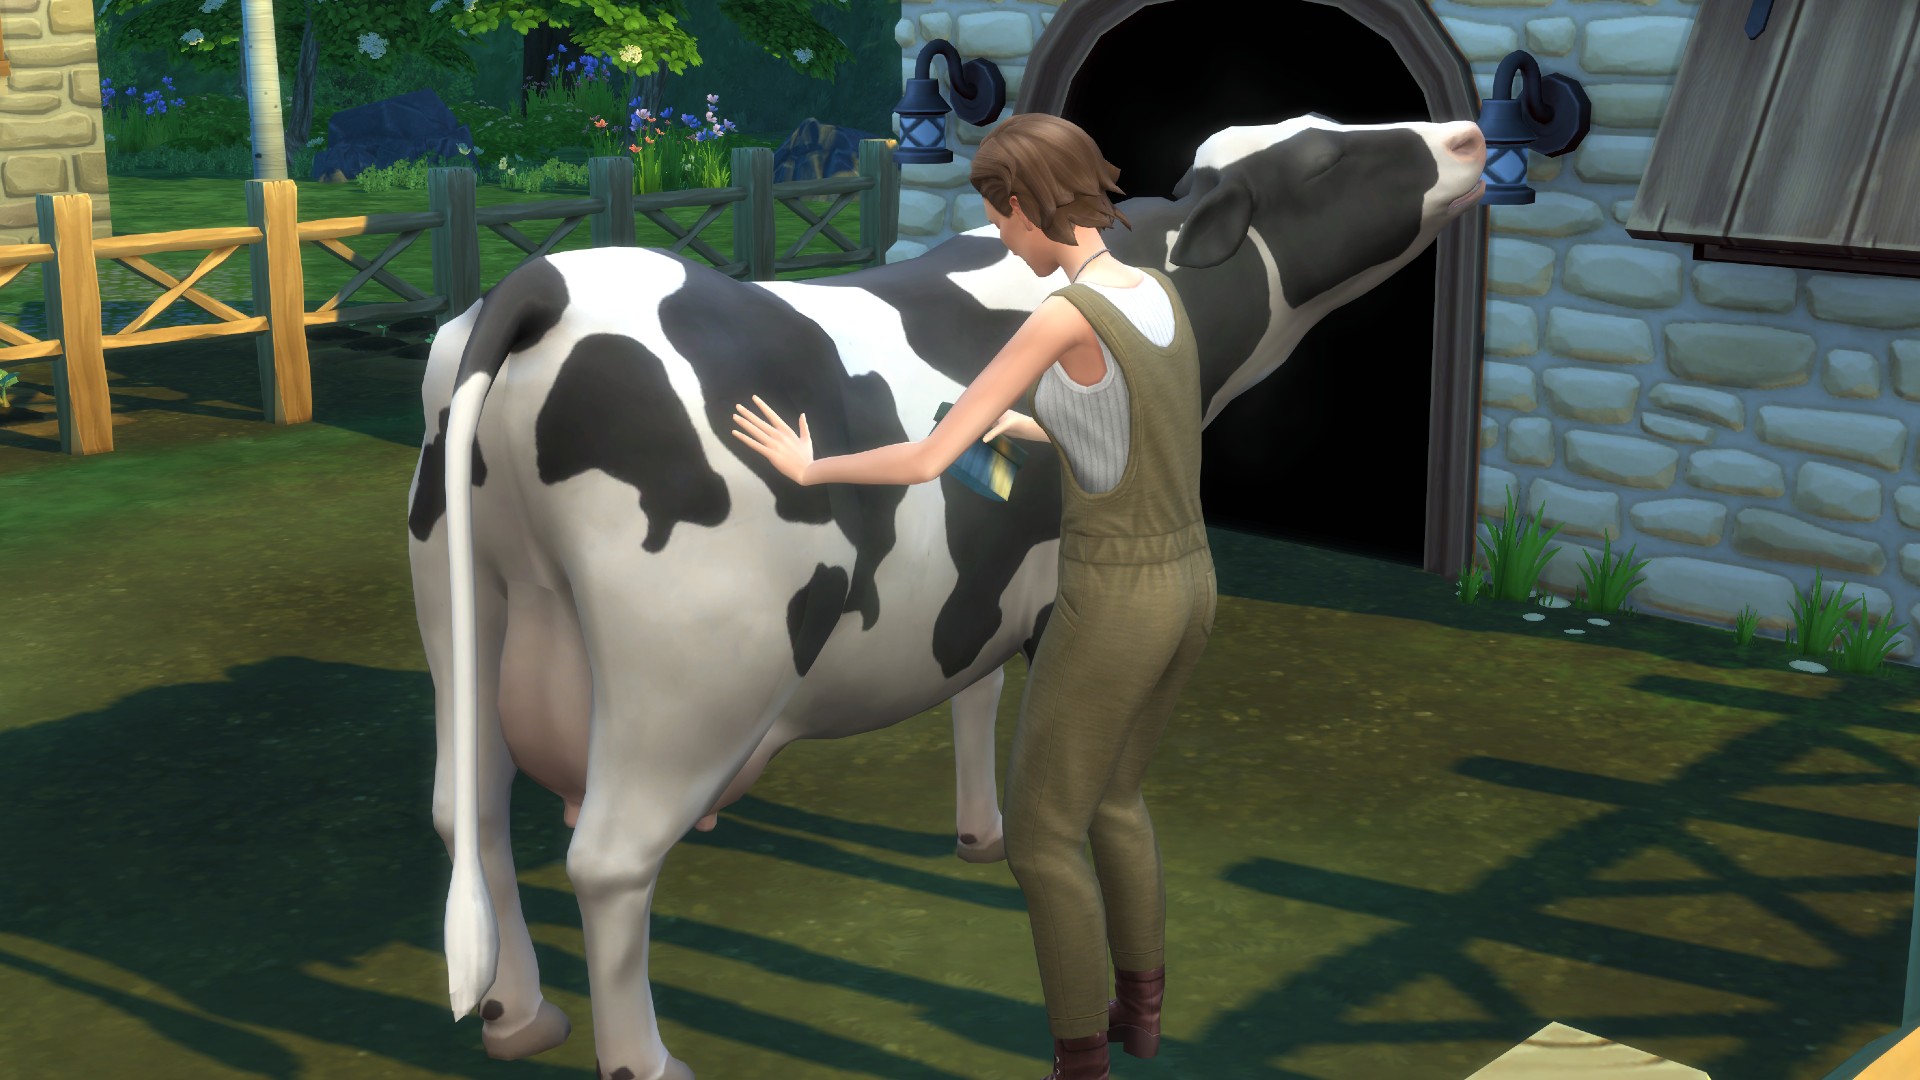 Sims 4 PS4 & Xbox One: 5 tips to get the most out of it